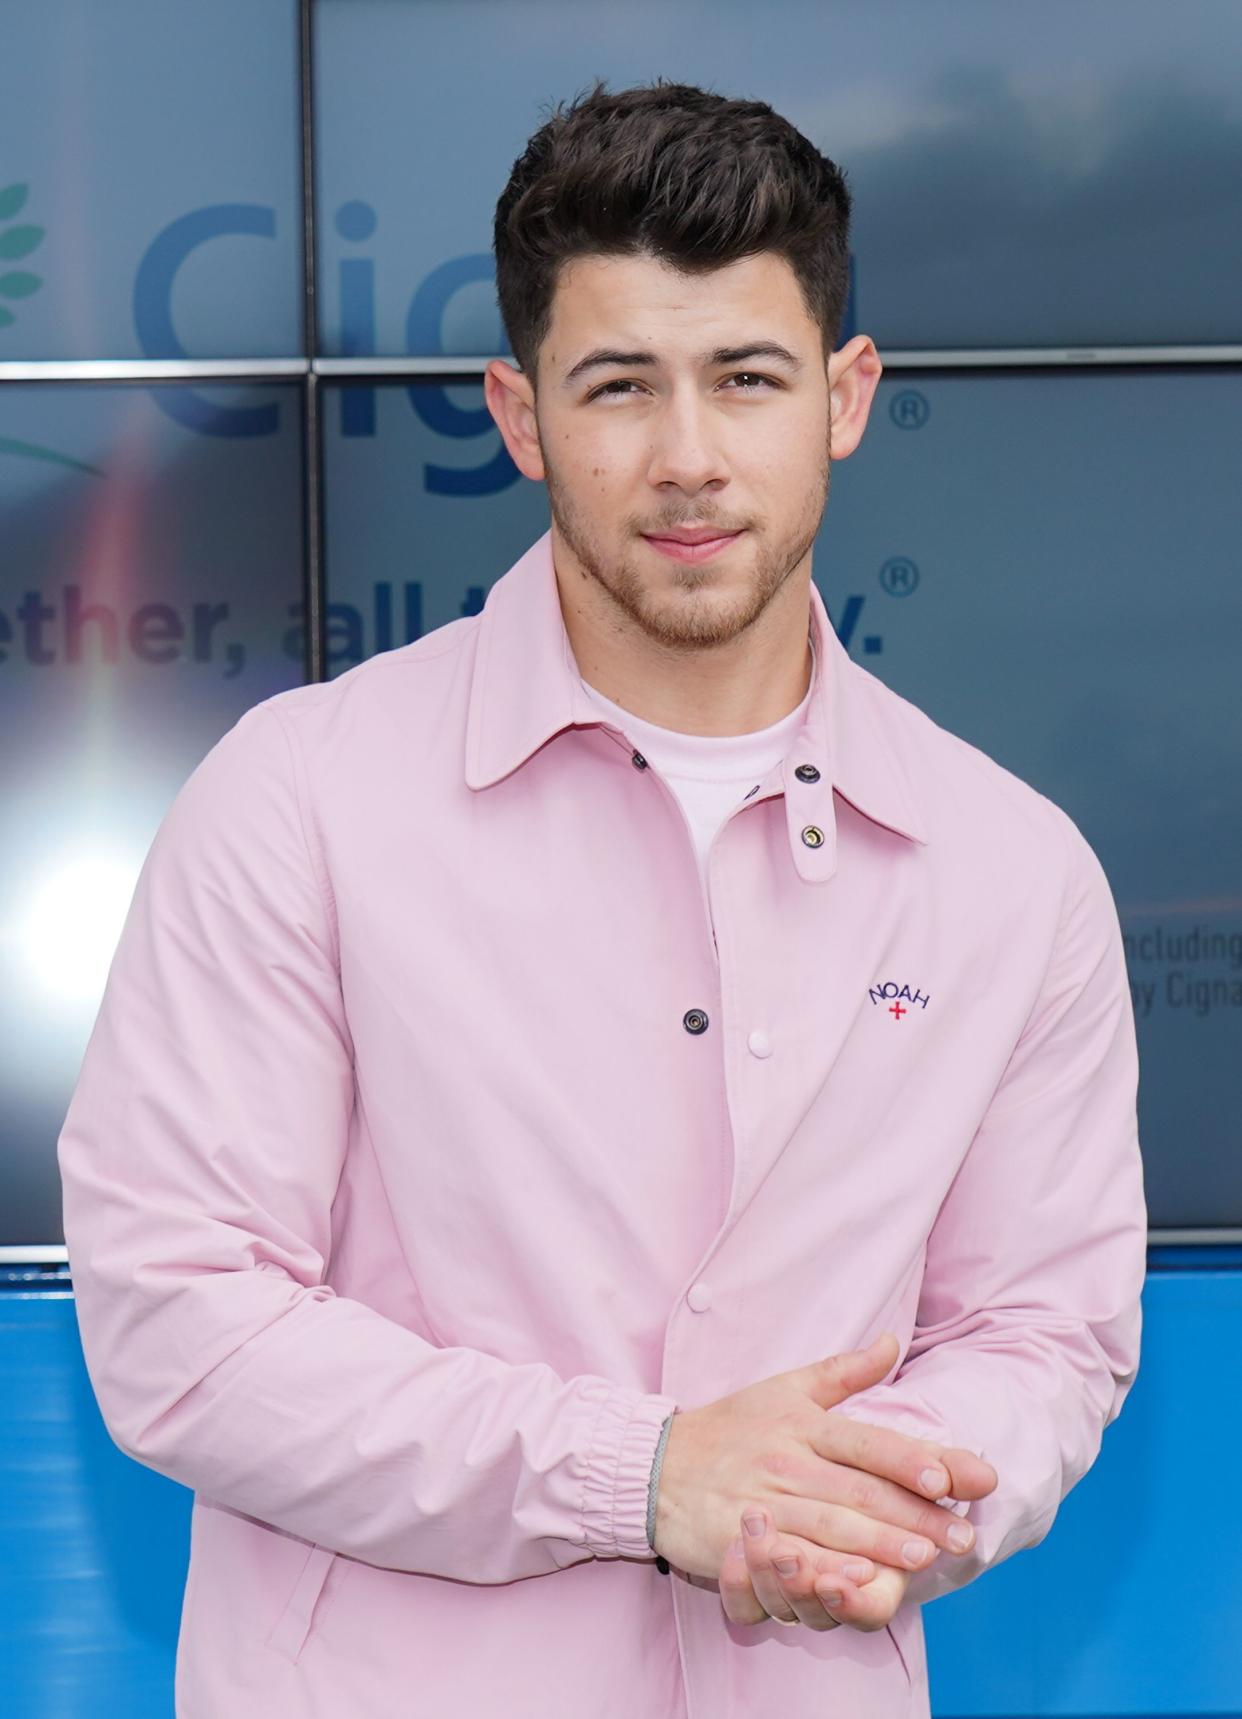 Nick Jonas poses with his hands clasped.